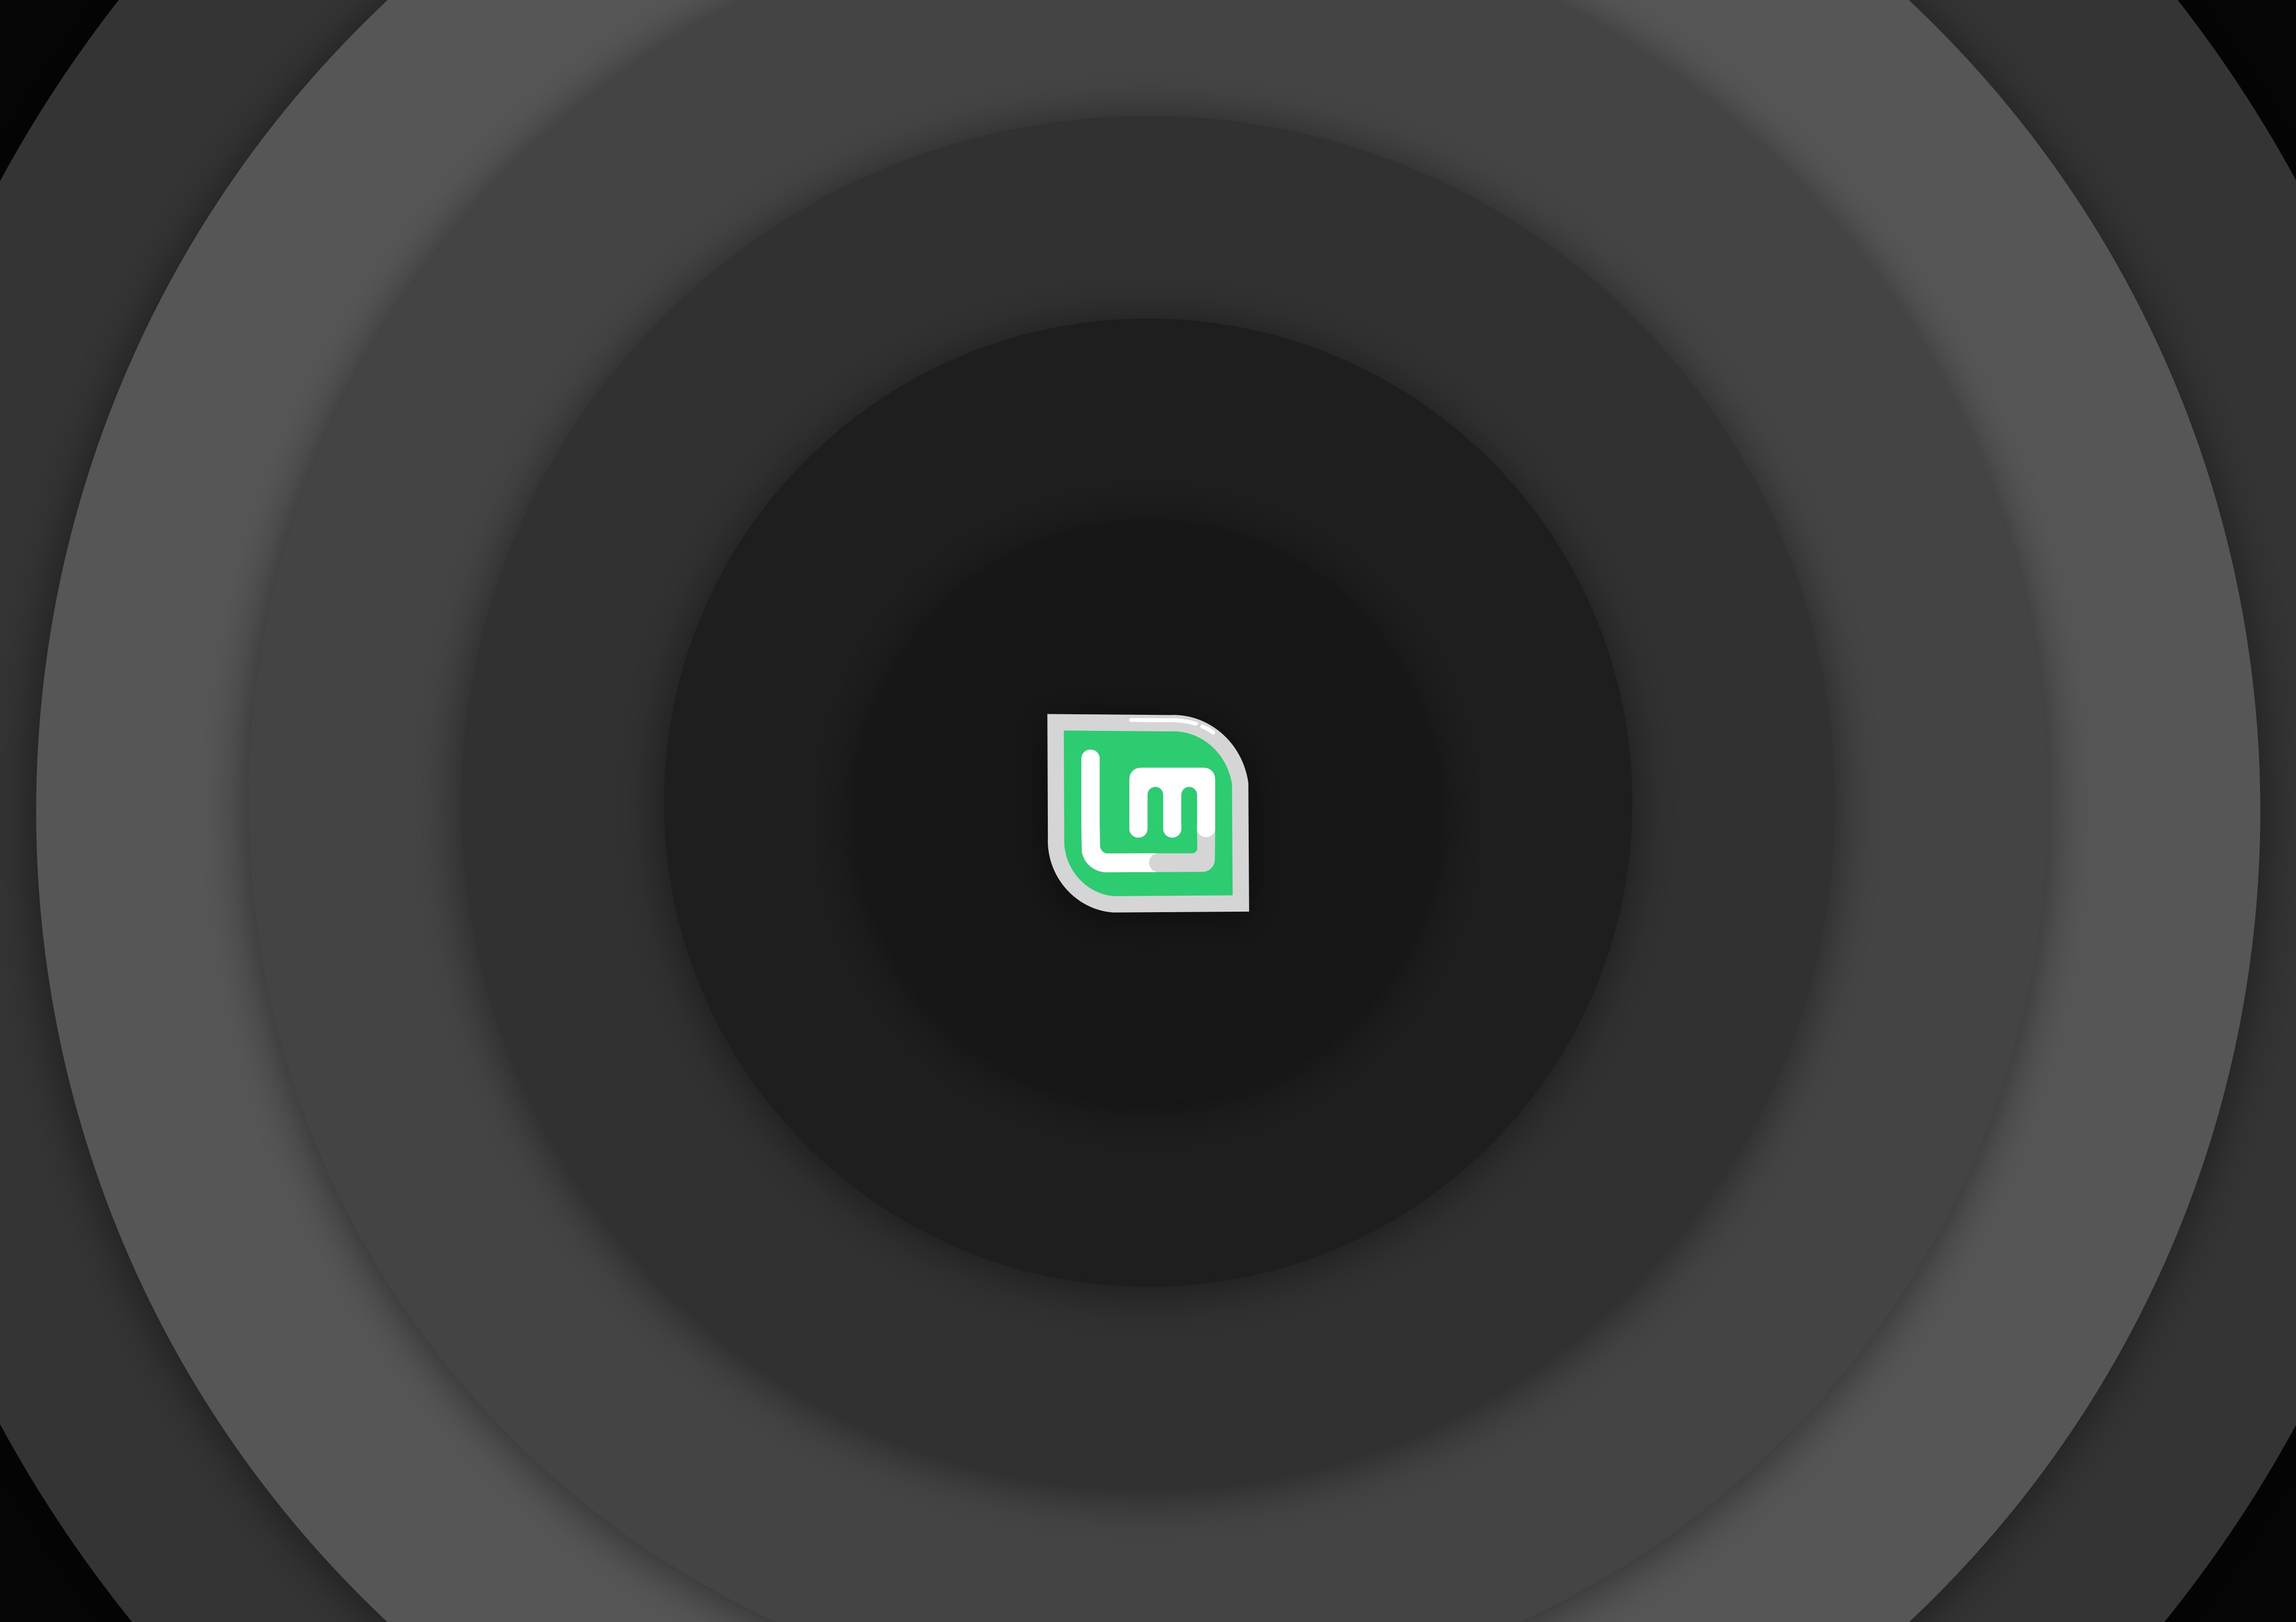 Linux, Linux Mint, Circle, Black,  grey, Green, Simple background Wallpaper